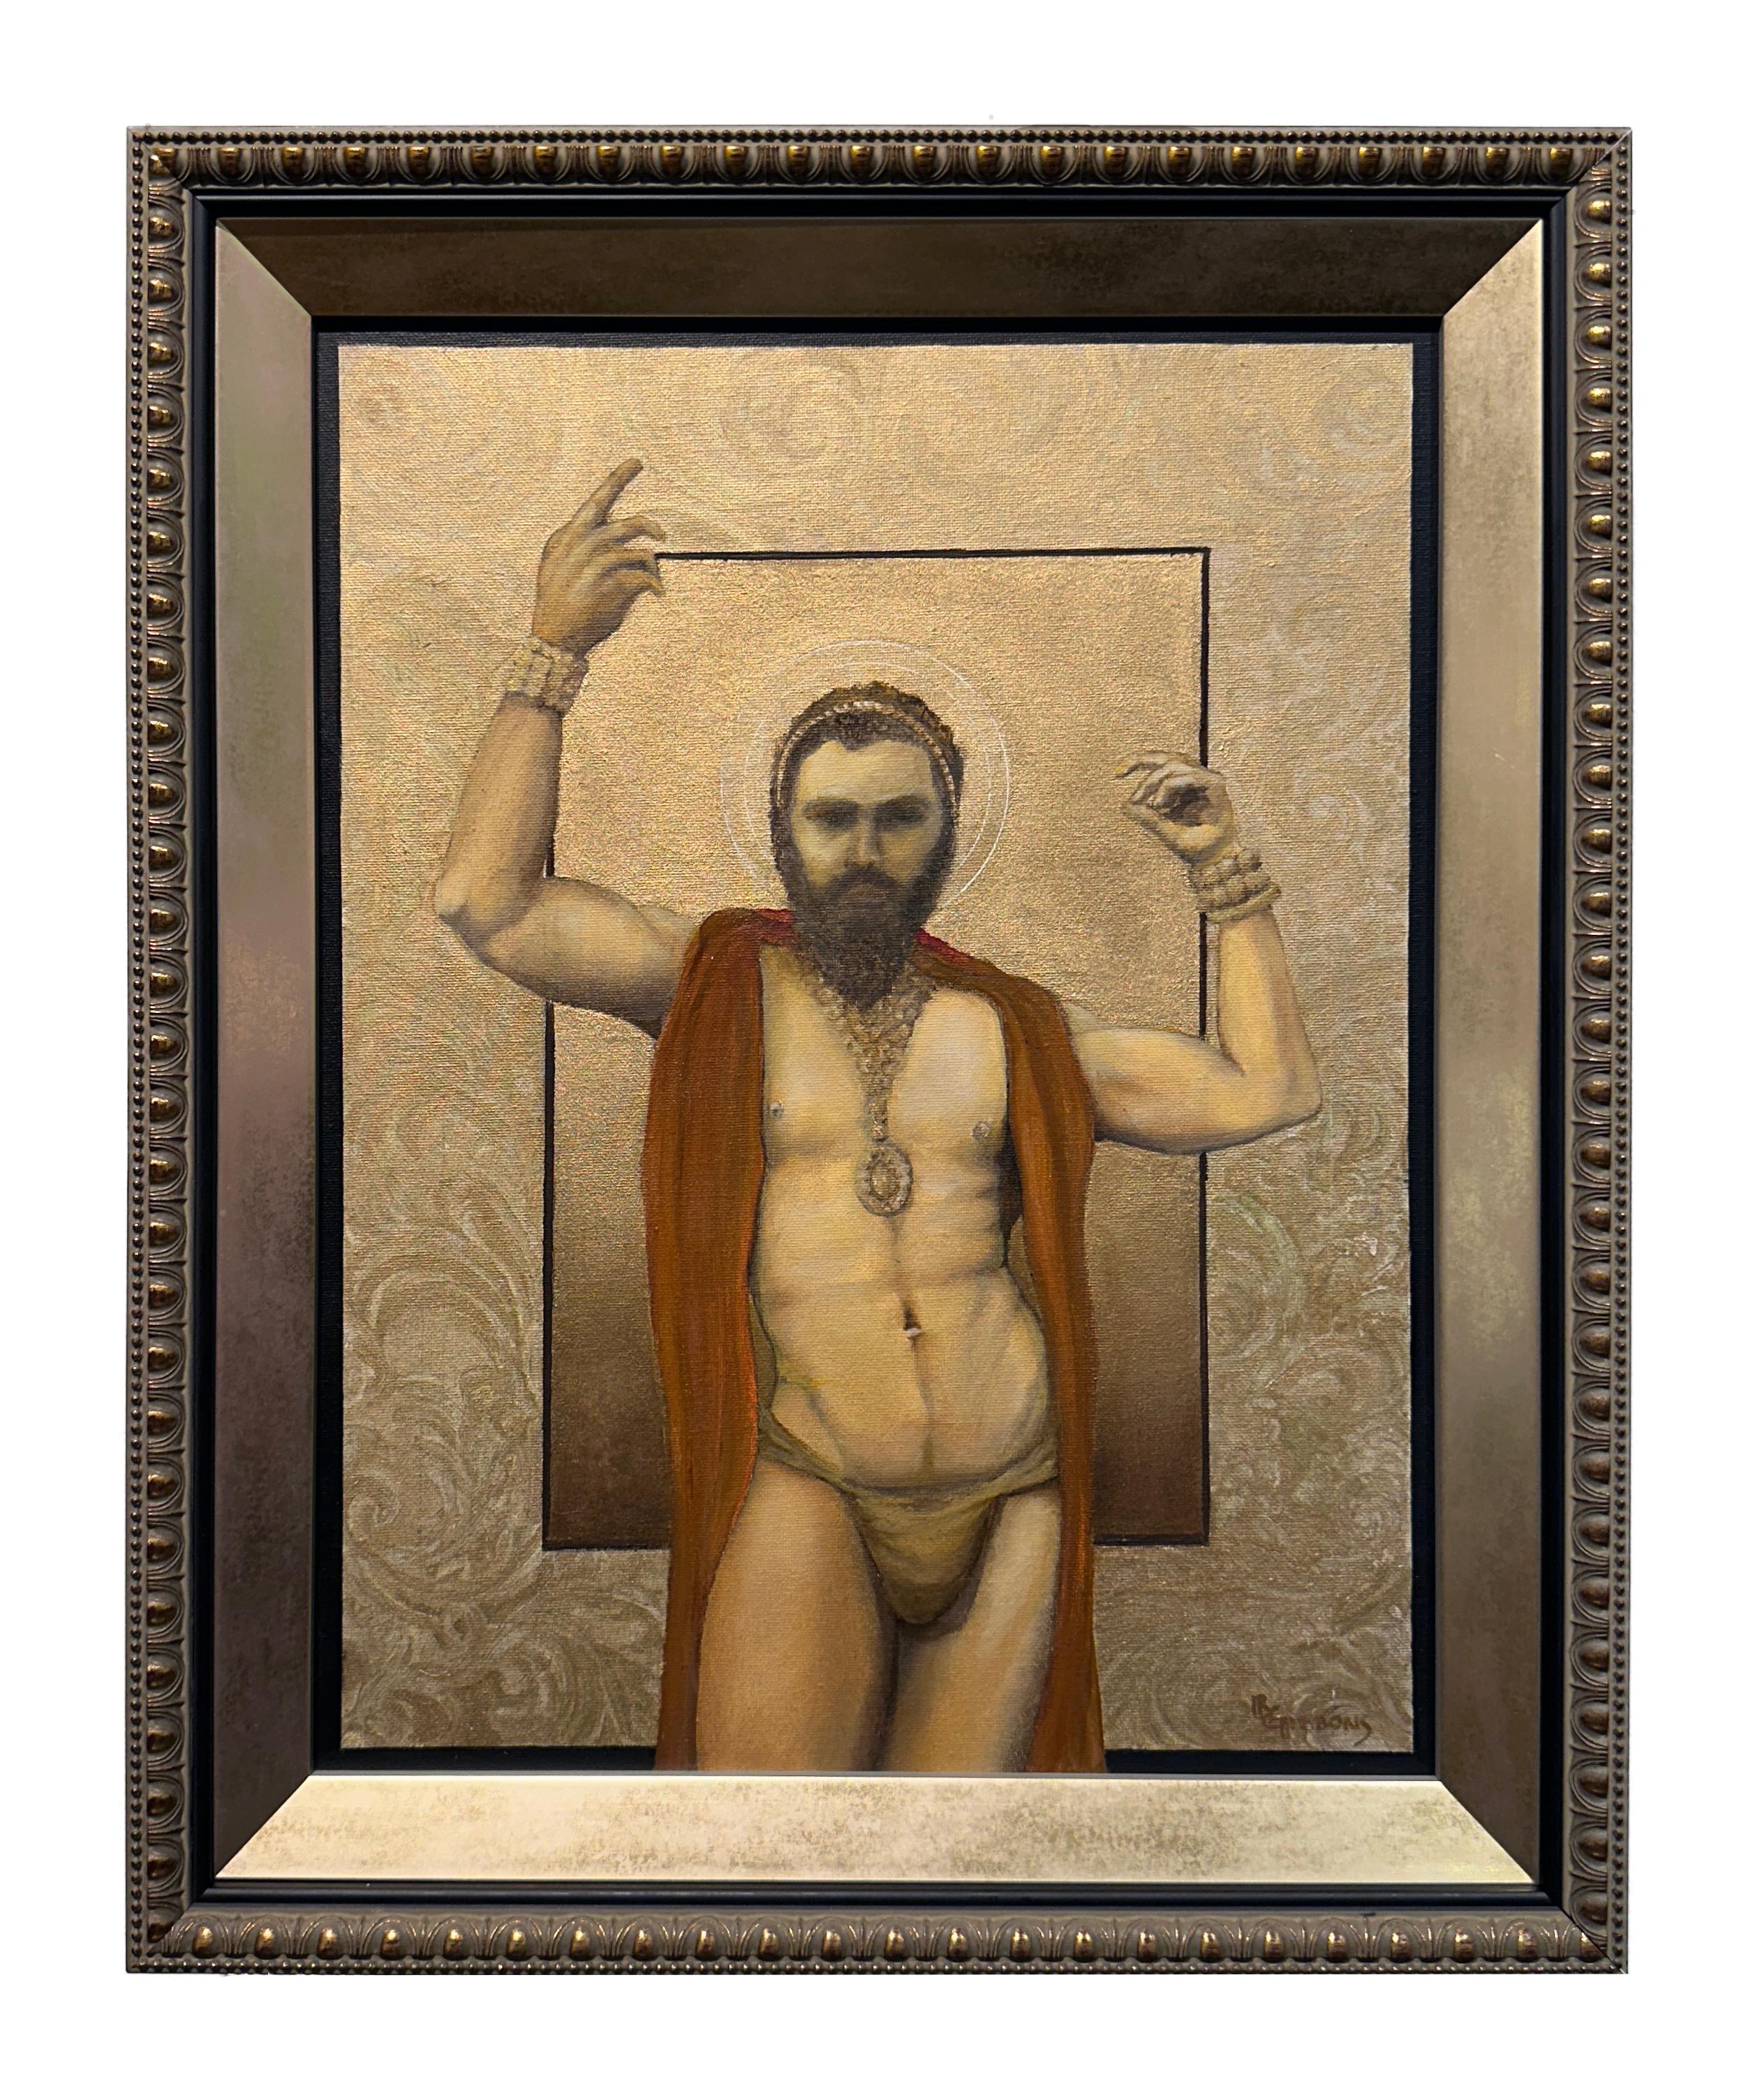 Richard Gibbons Figurative Painting - The Priest King of Knossos, Muscular Male, Original Oil on Canvas